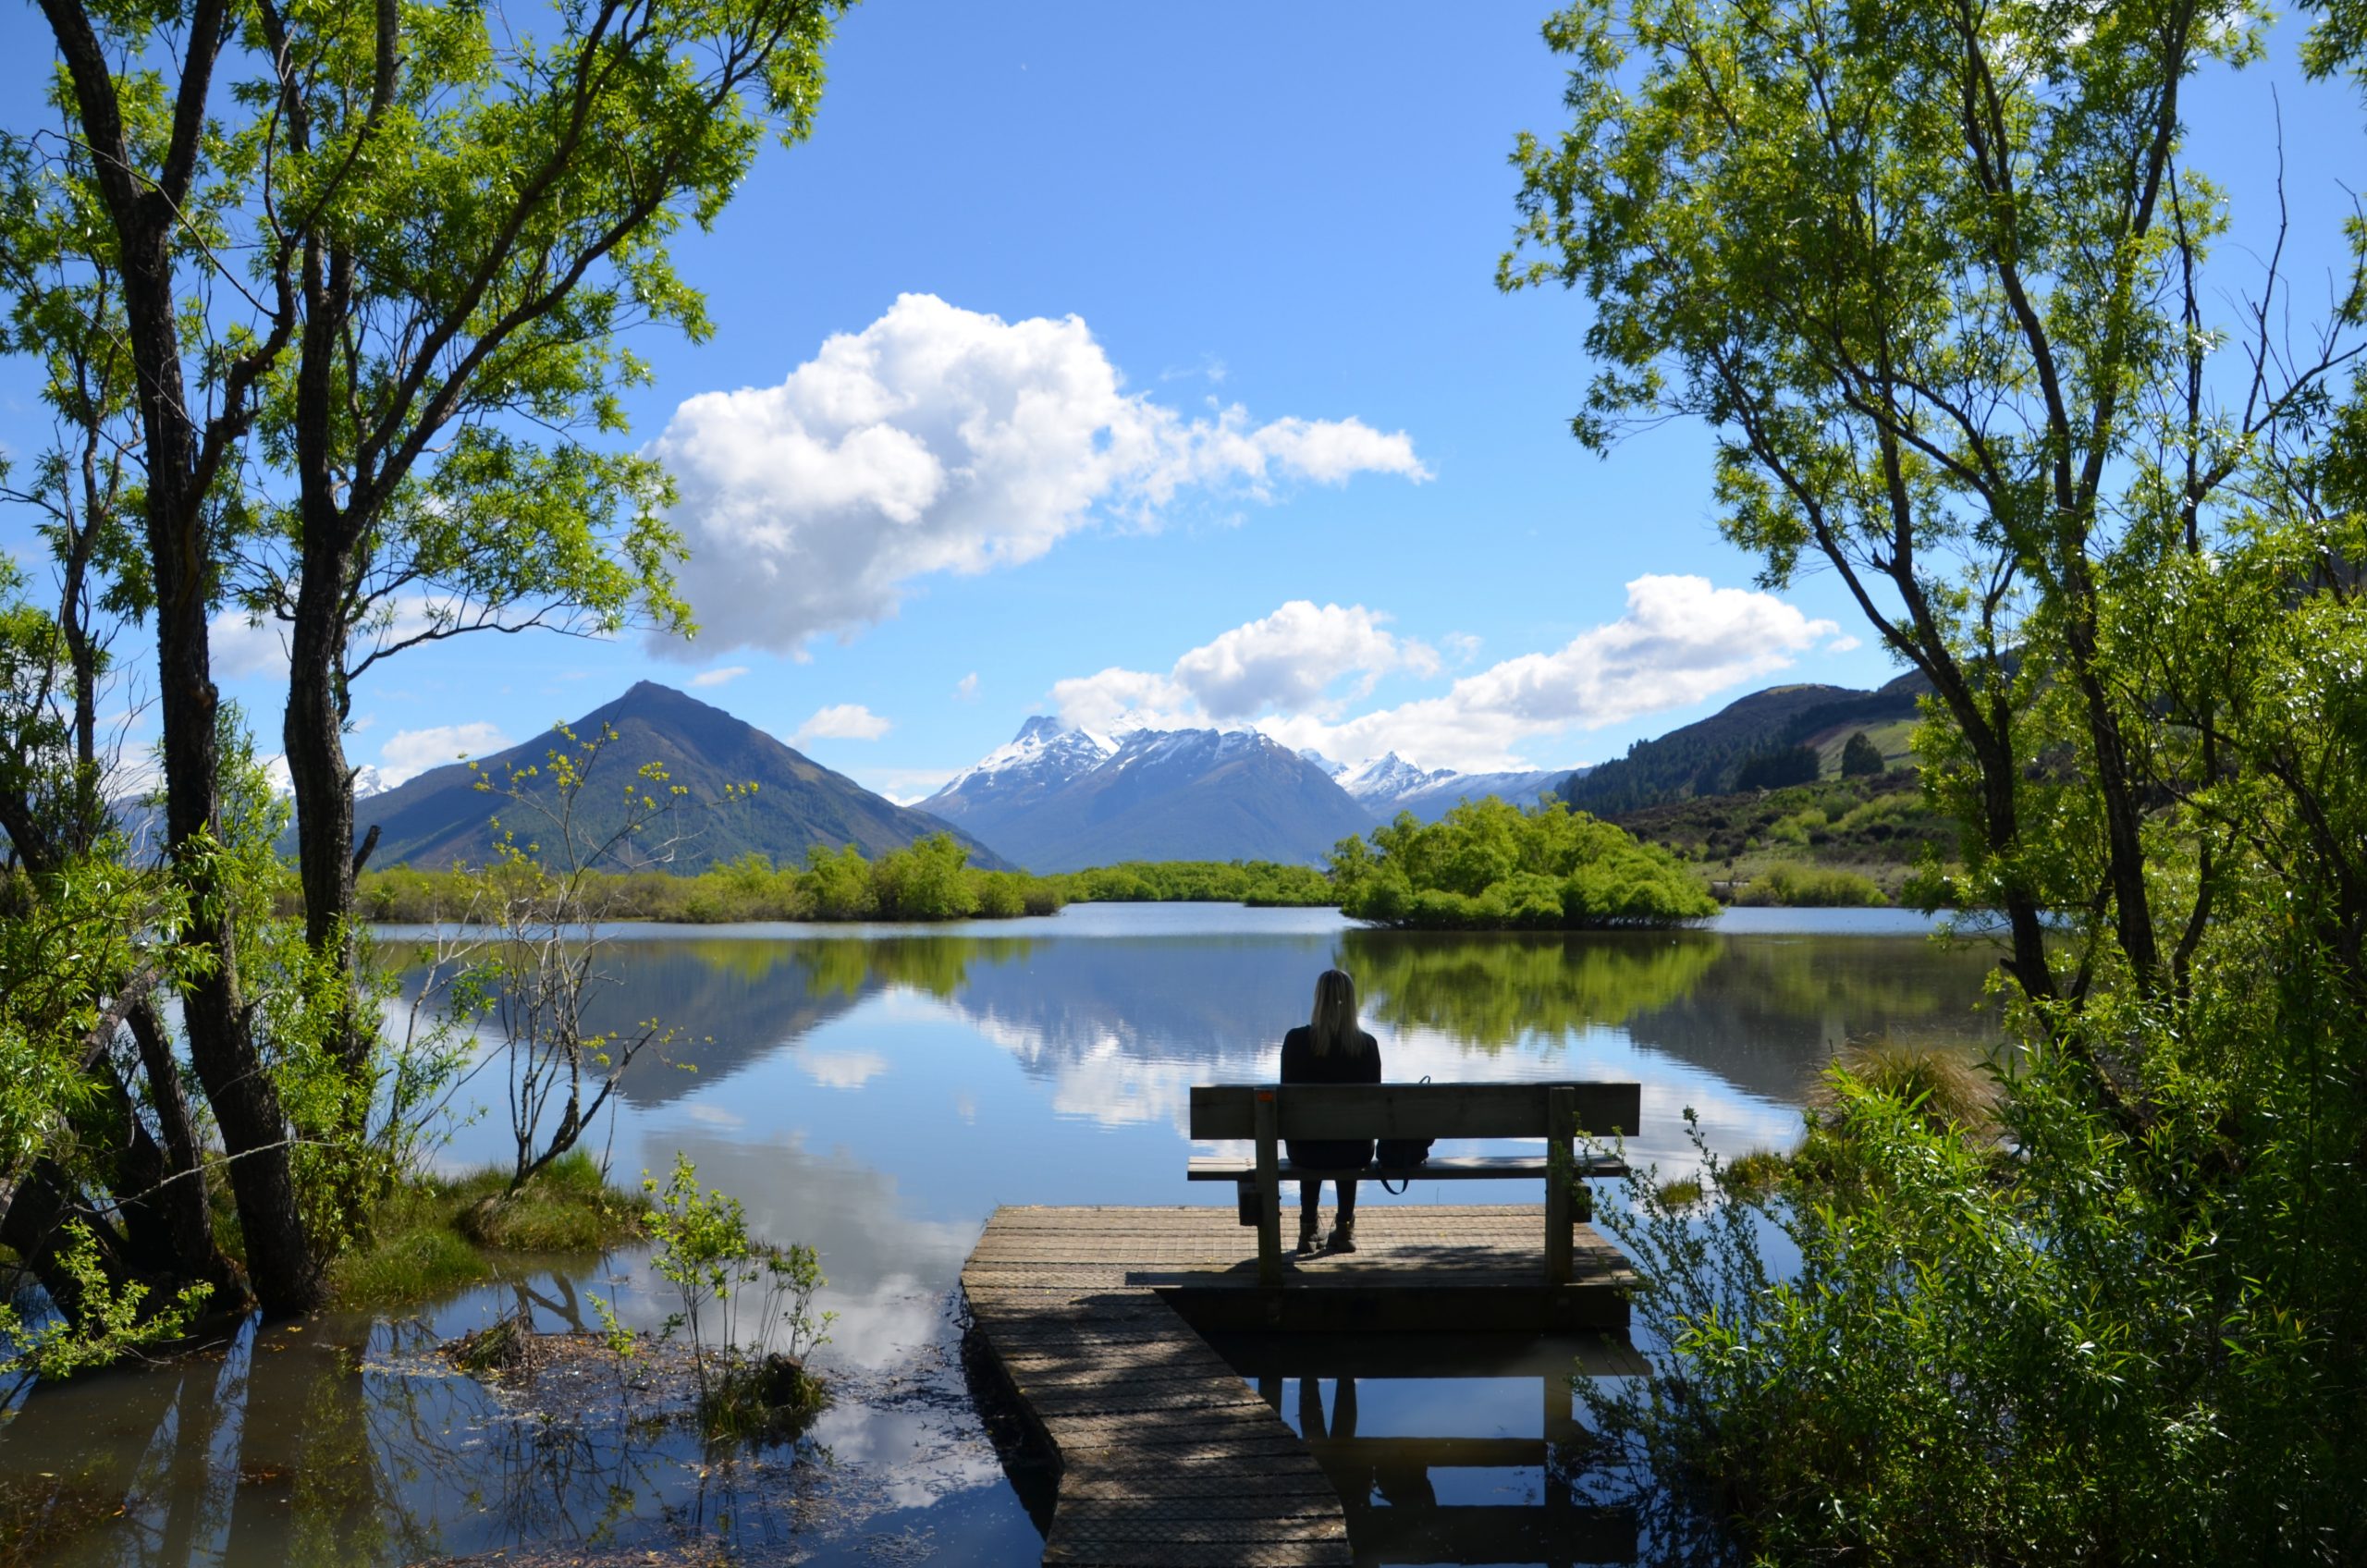 A person sitting on a bench on a wooden boardwalk jutting out onto a lake with trees and mountains in the distance.